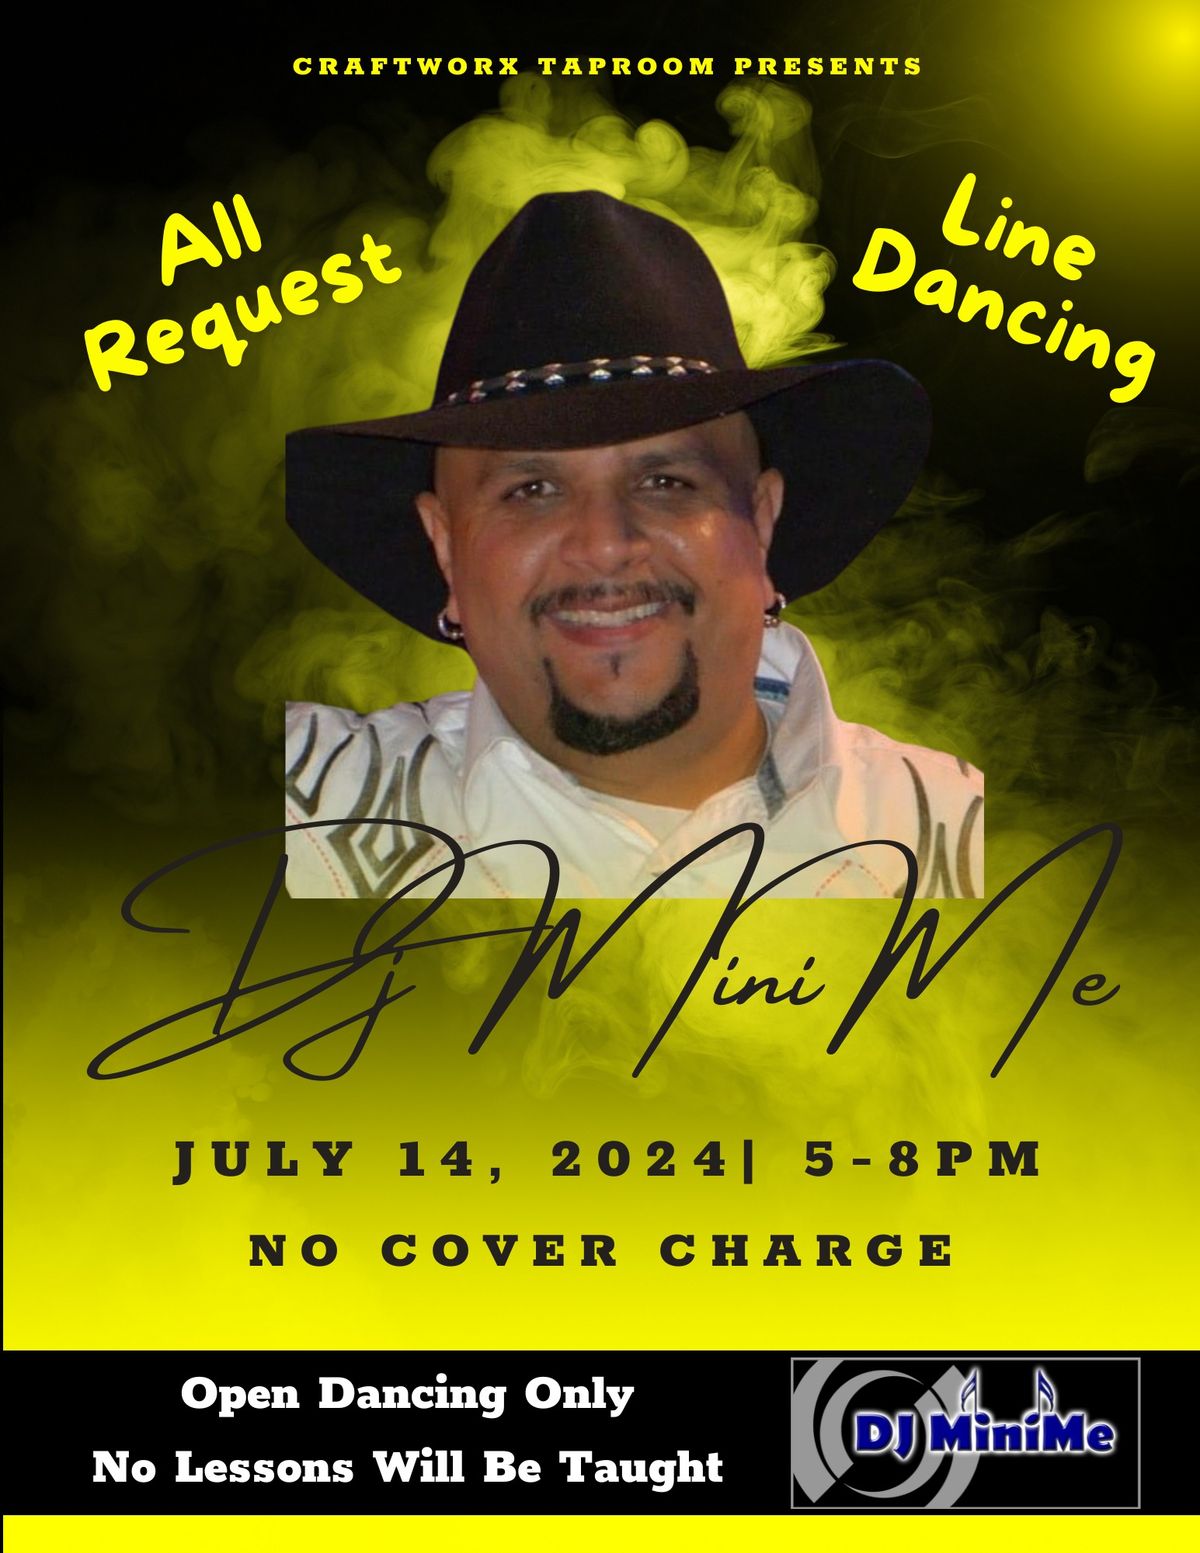 All Request Line Dancing Day with DJ MiniMe